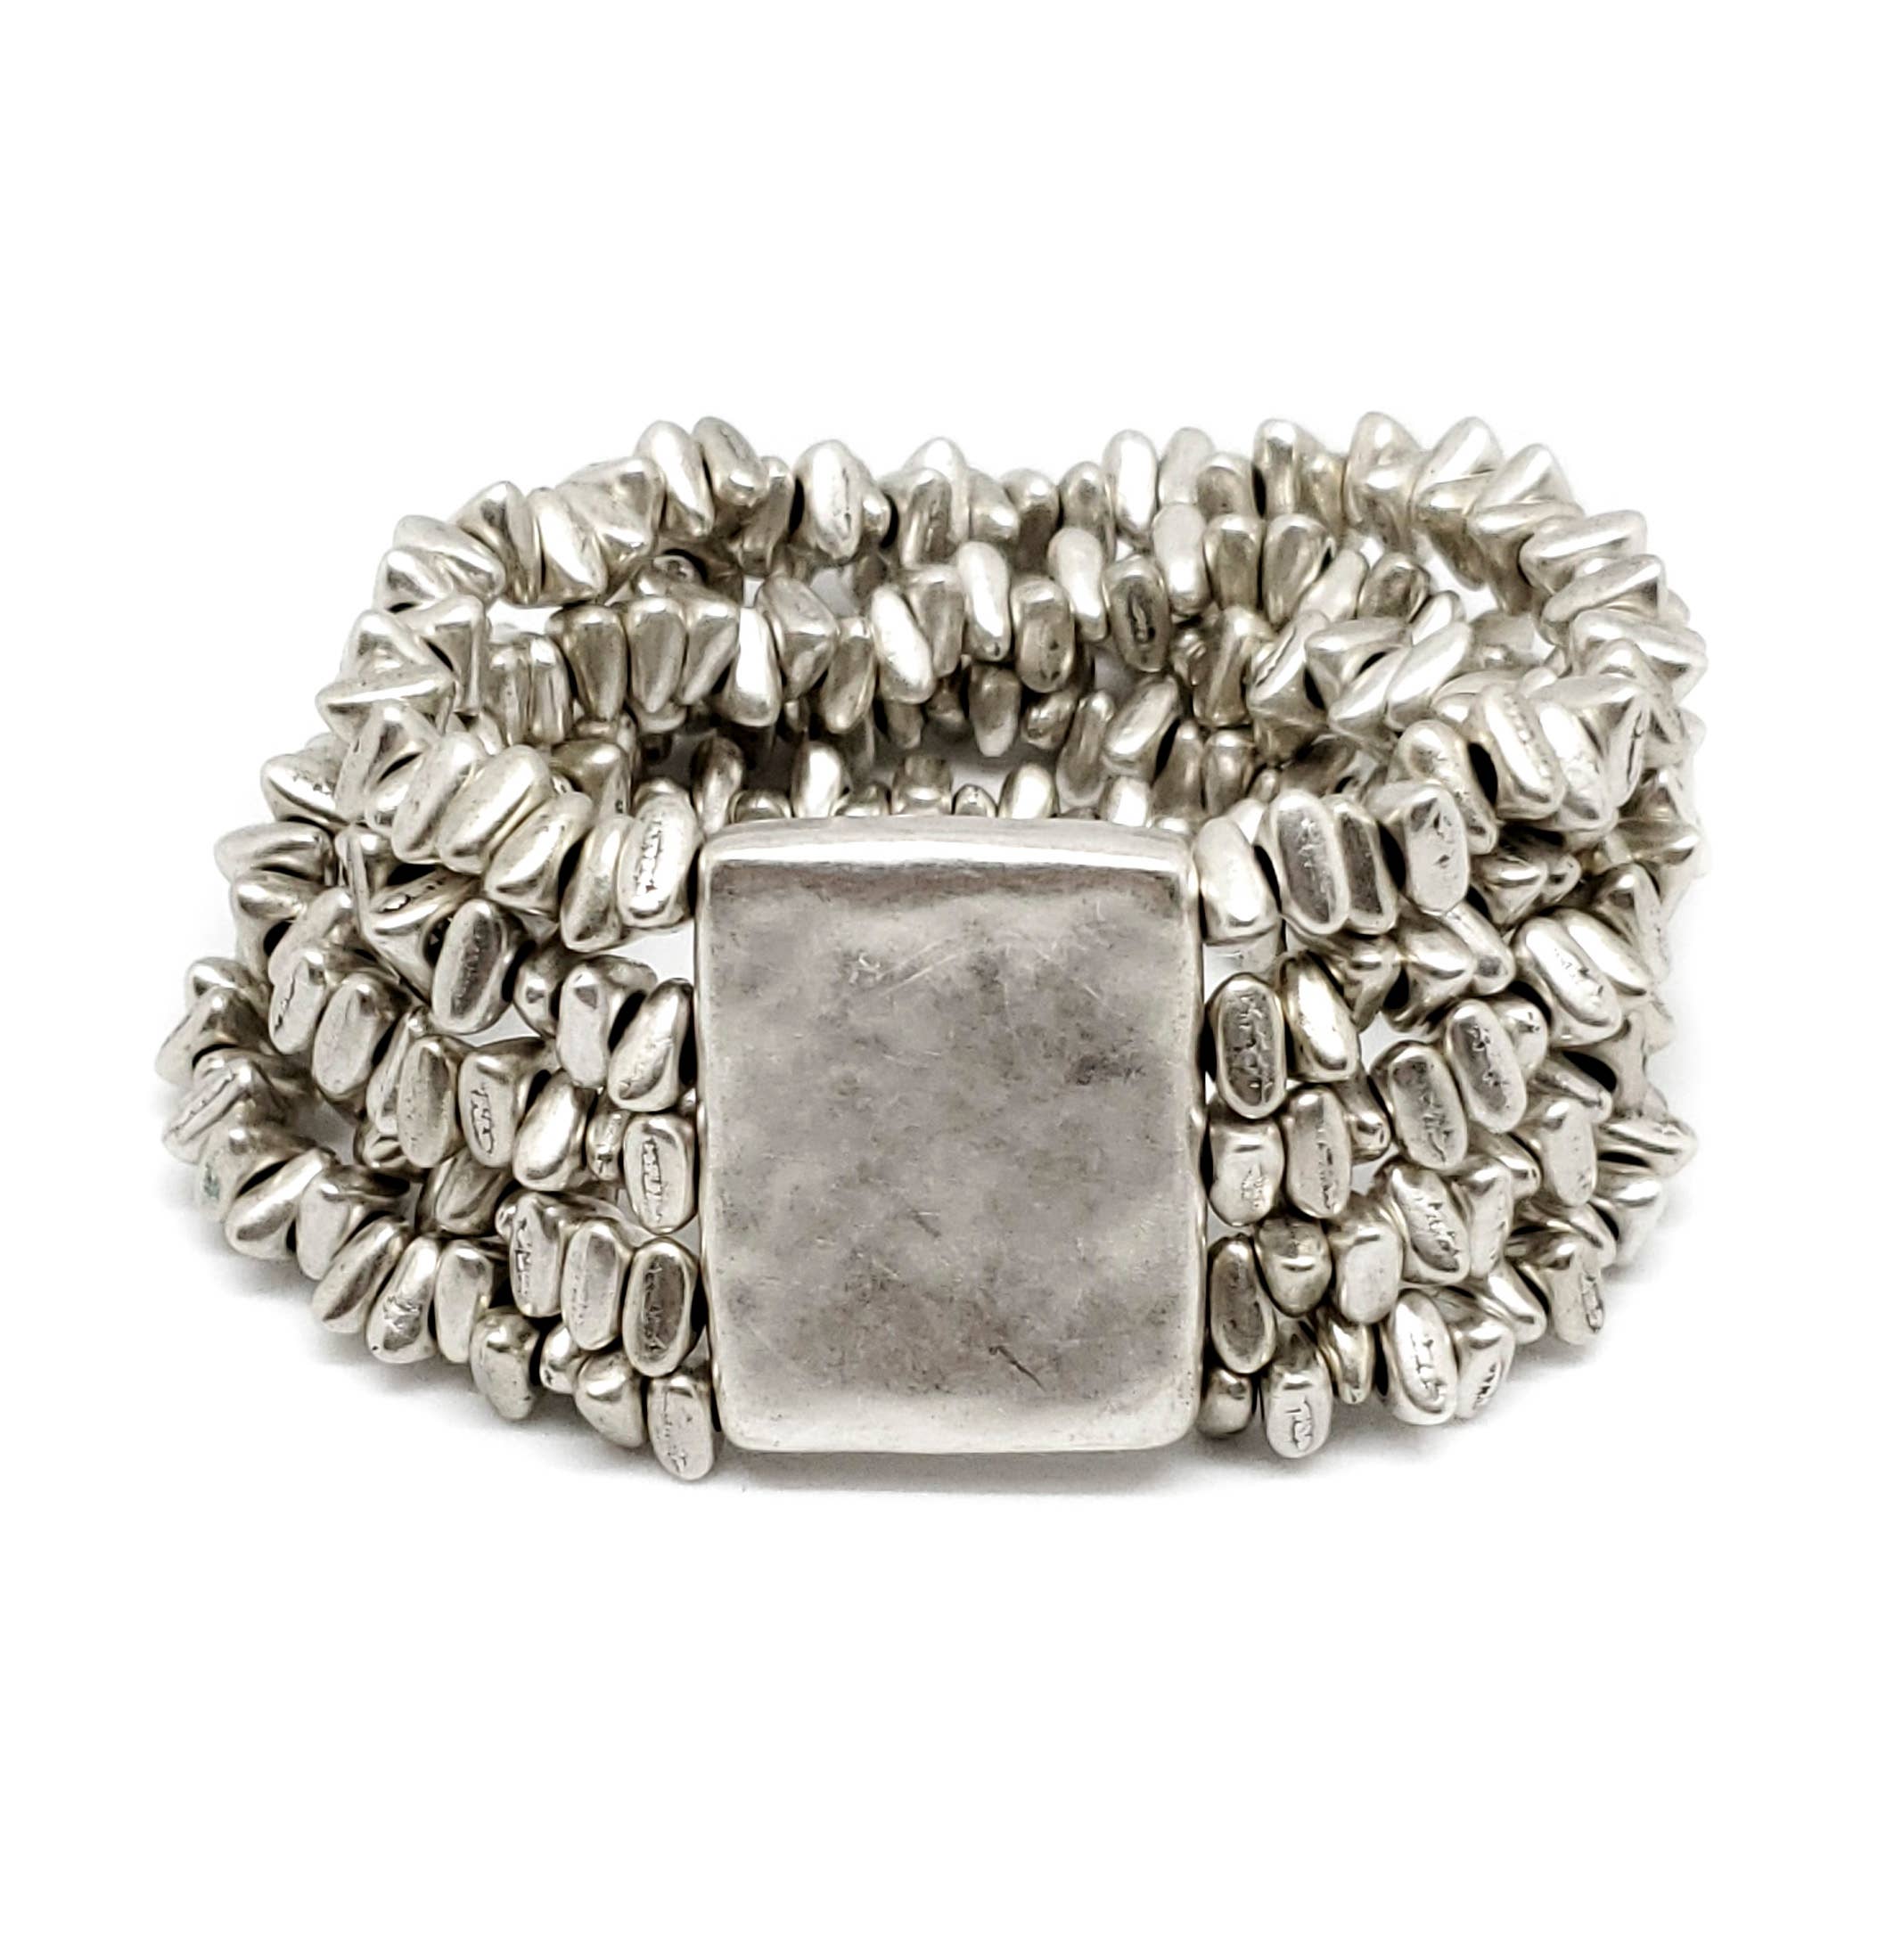 Abbie Handmade Pewter Bracelet - Coco and lulu boutique 